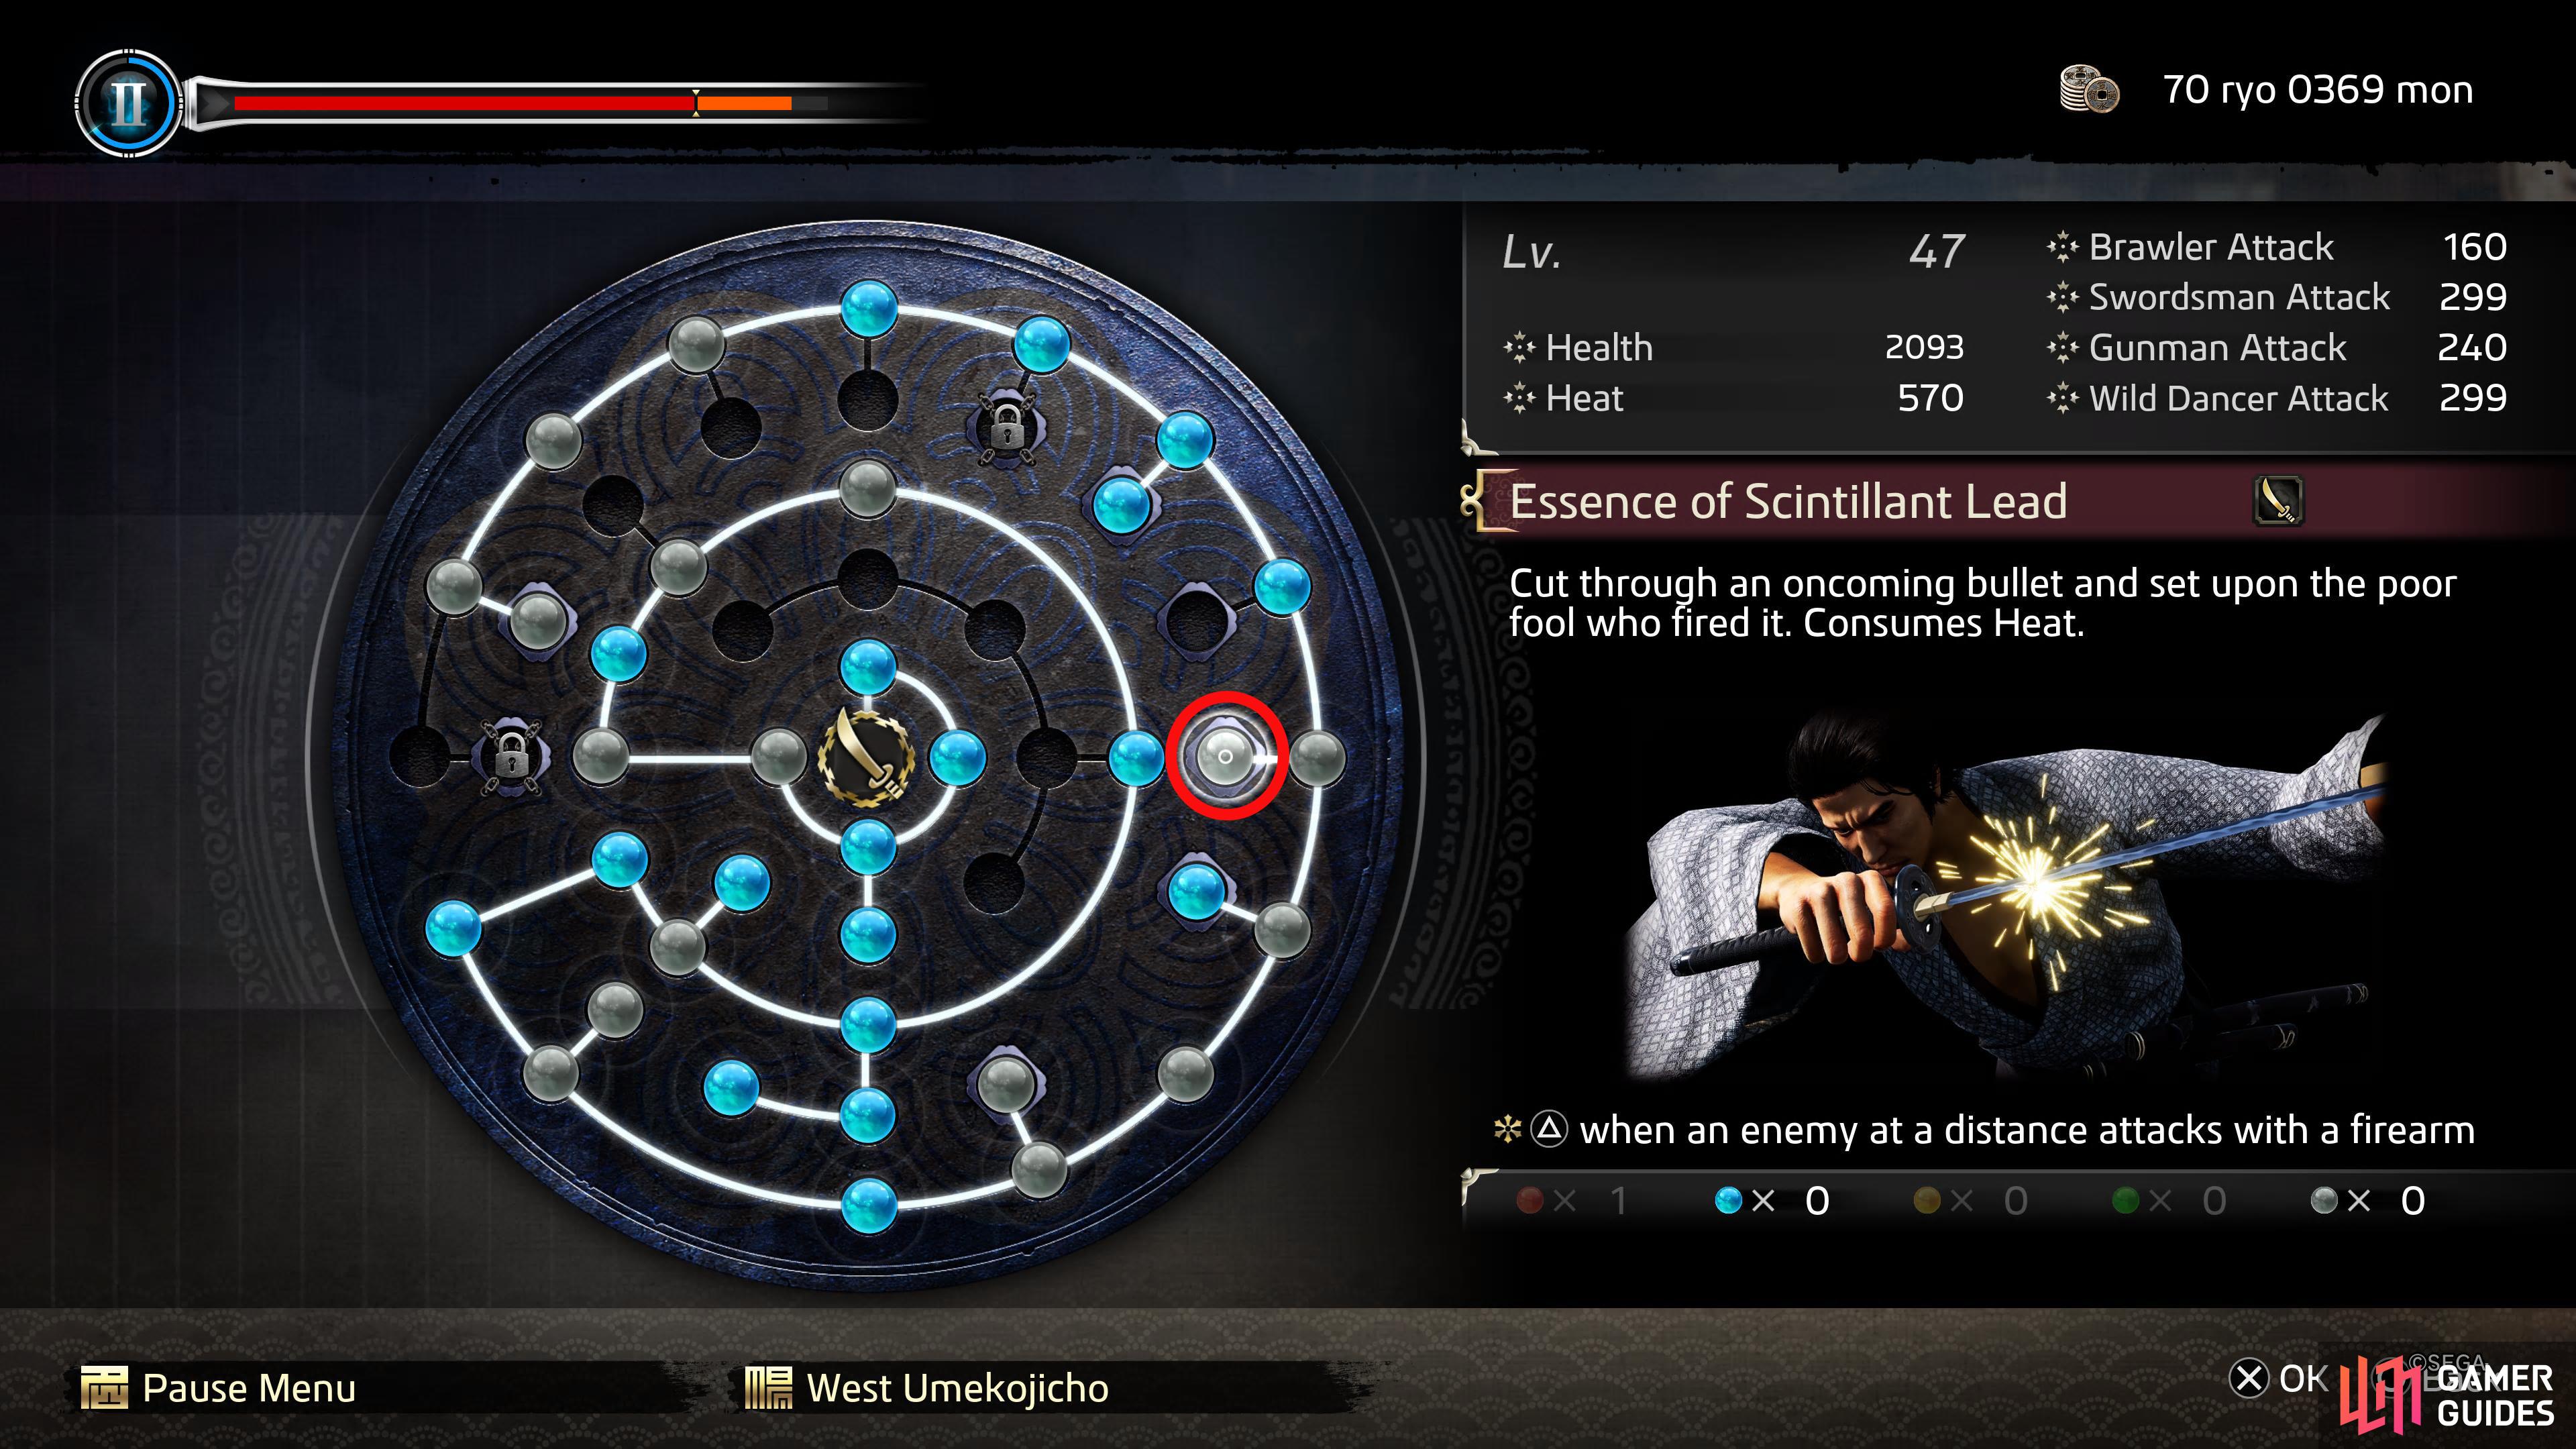 Here is where Scintillant Lead is on the Ability Wheel.